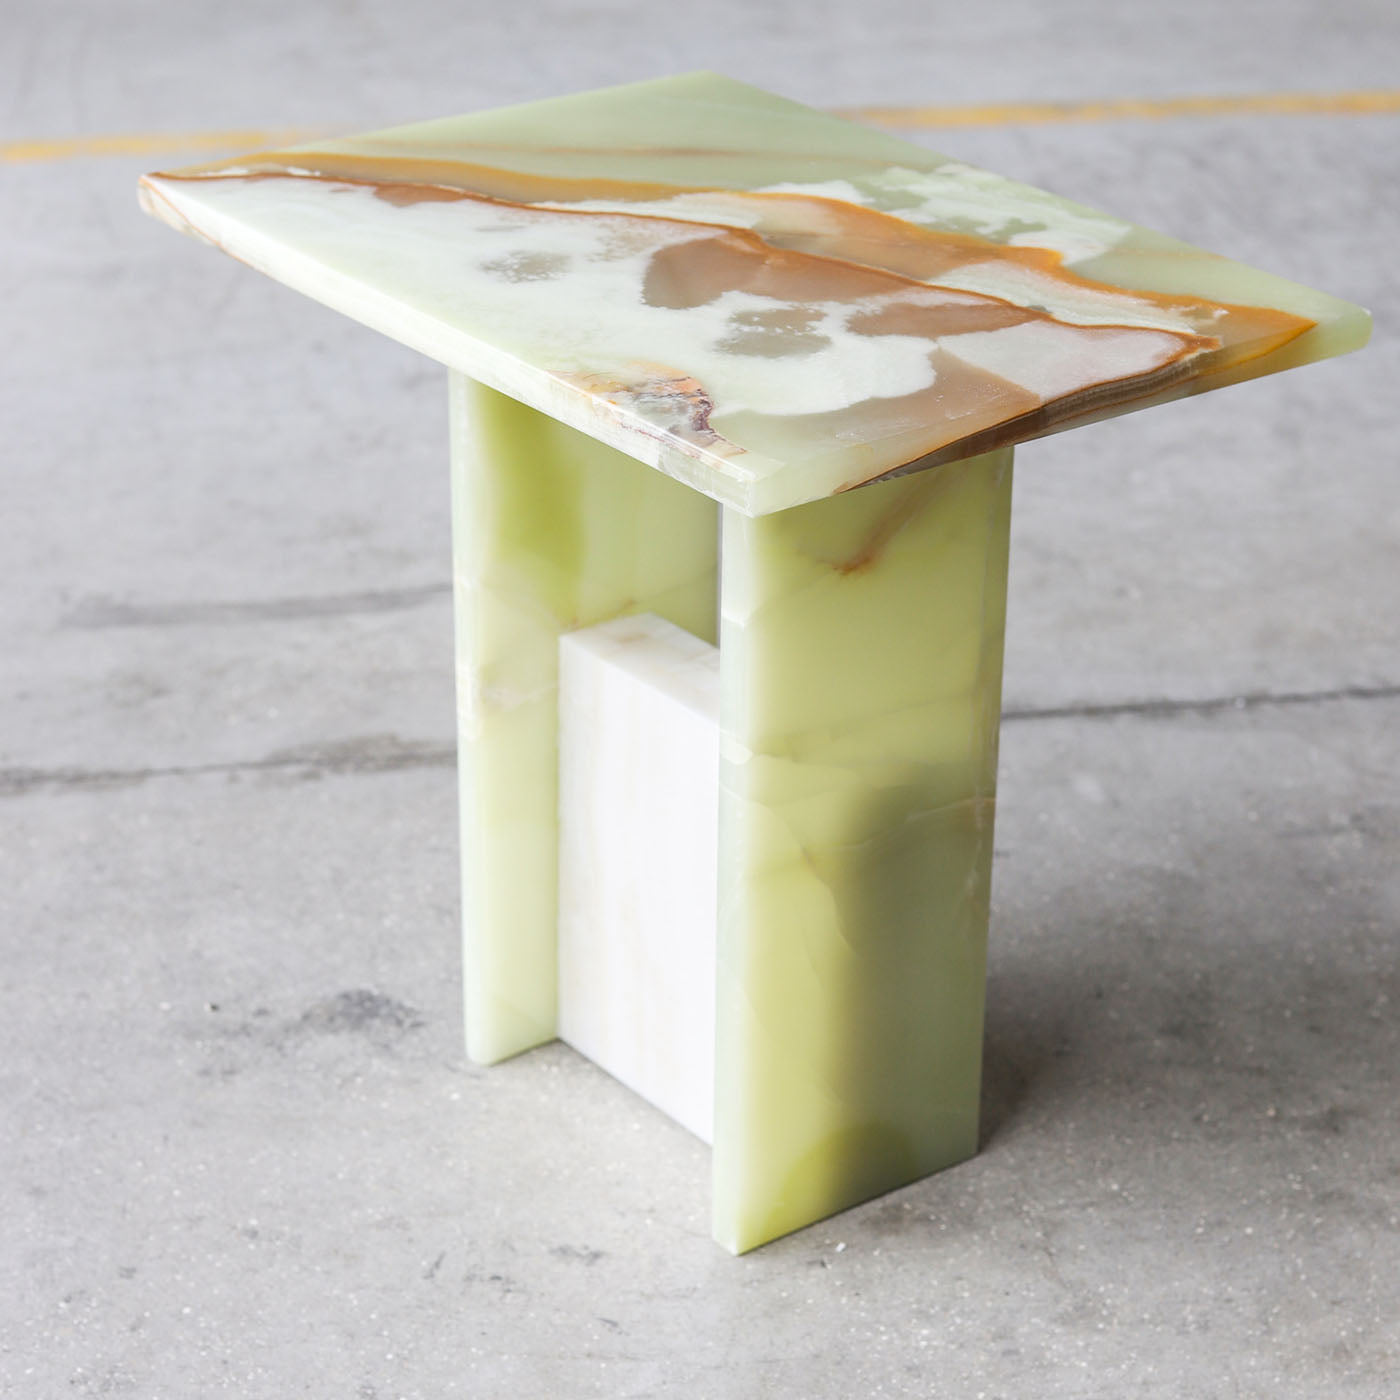 SST016-2 Onyx Marble Side Table - Alternative view 3